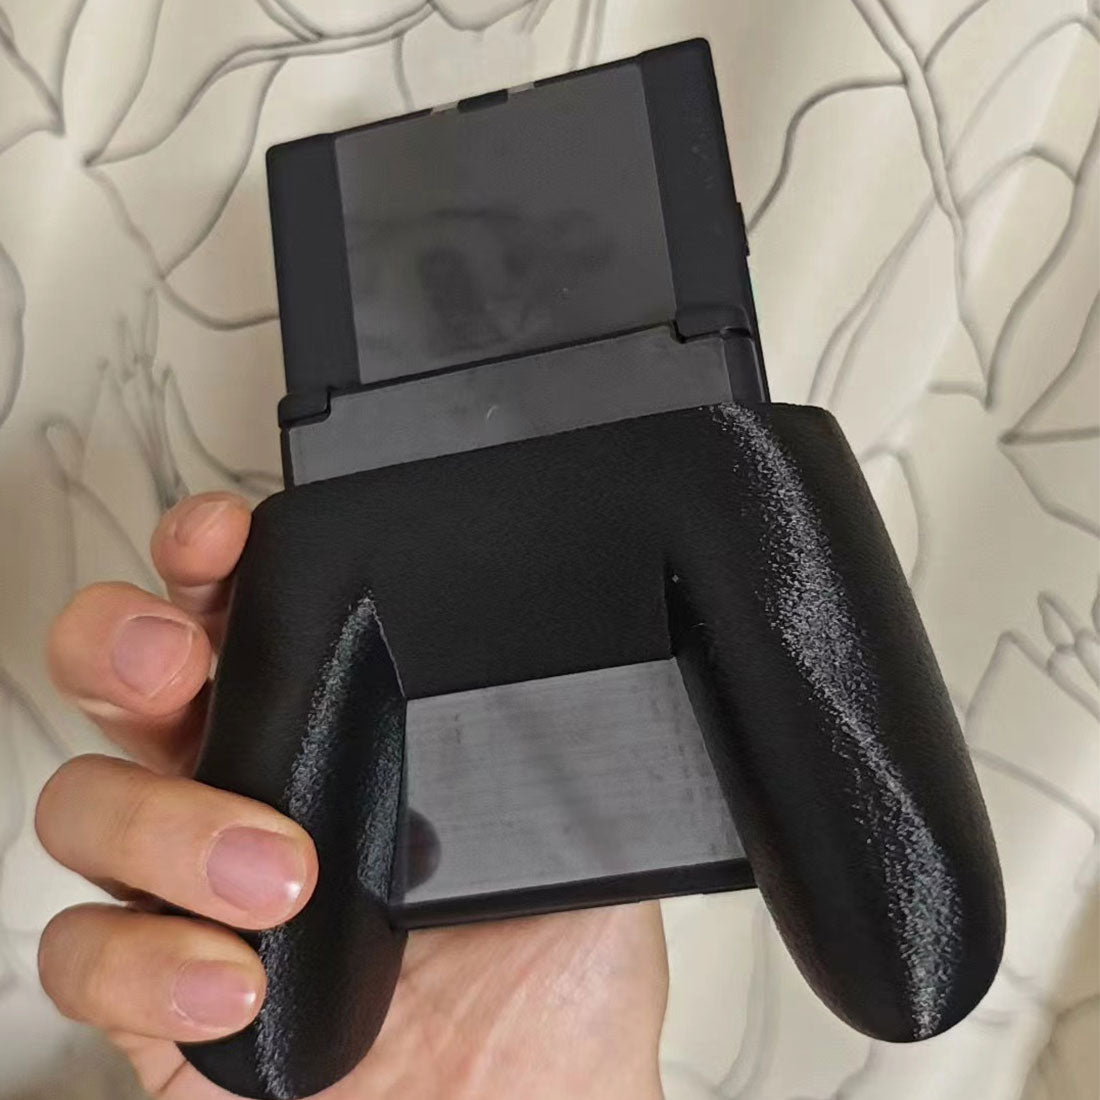 litnxt_3D_printed_flexible_handle_for_analogue_pocket_game_consoles_black_05